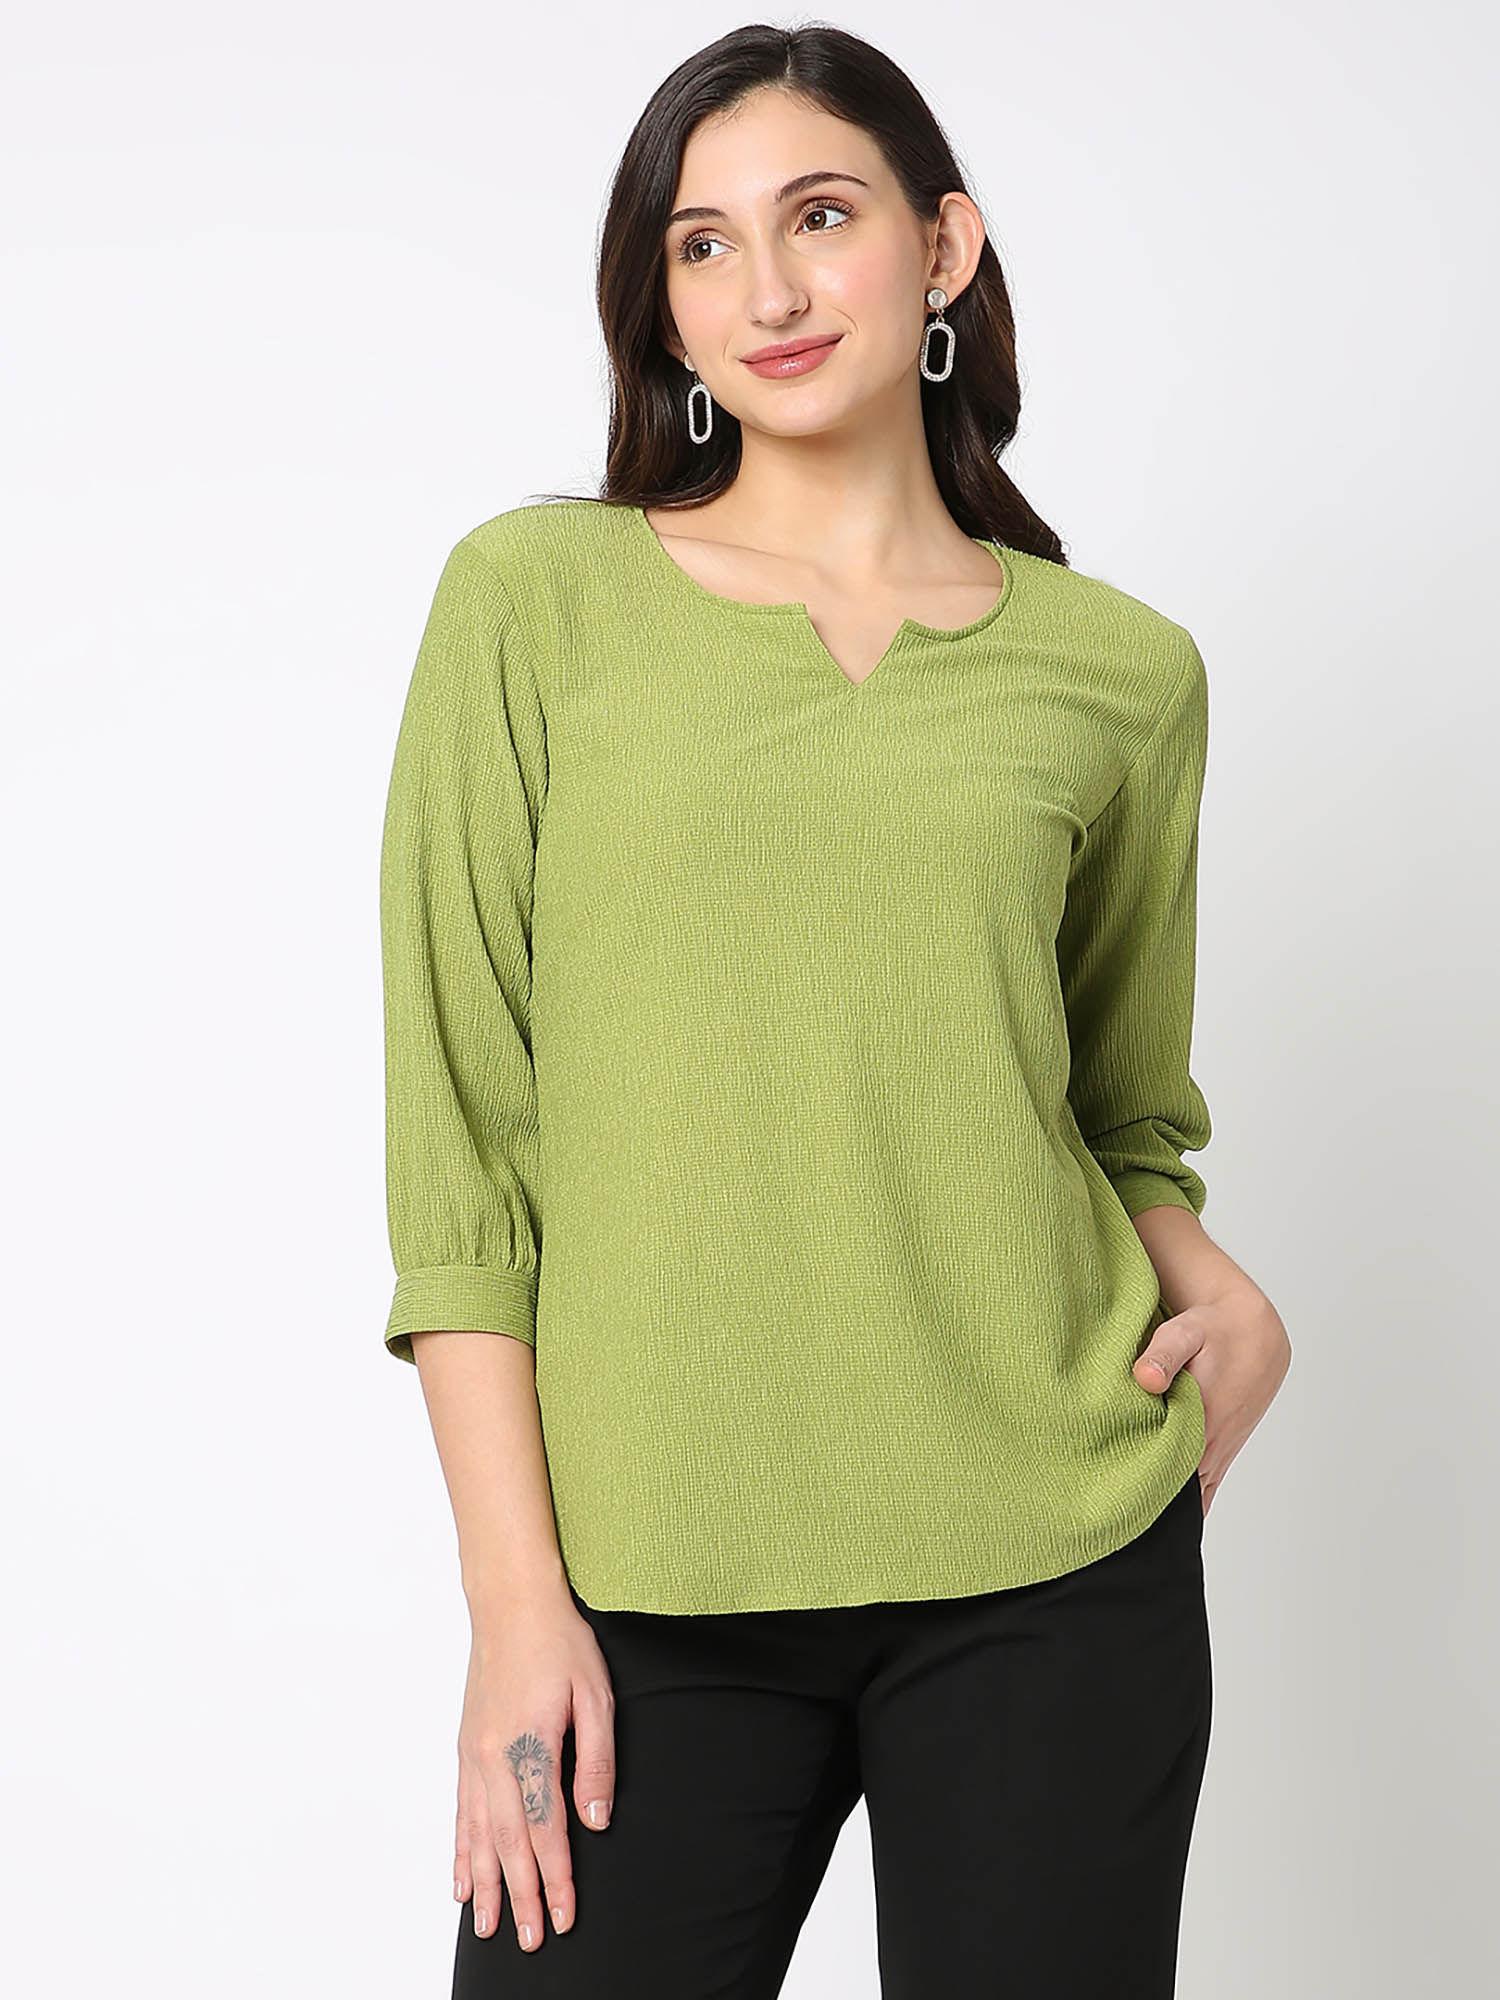 solid green full sleeves top